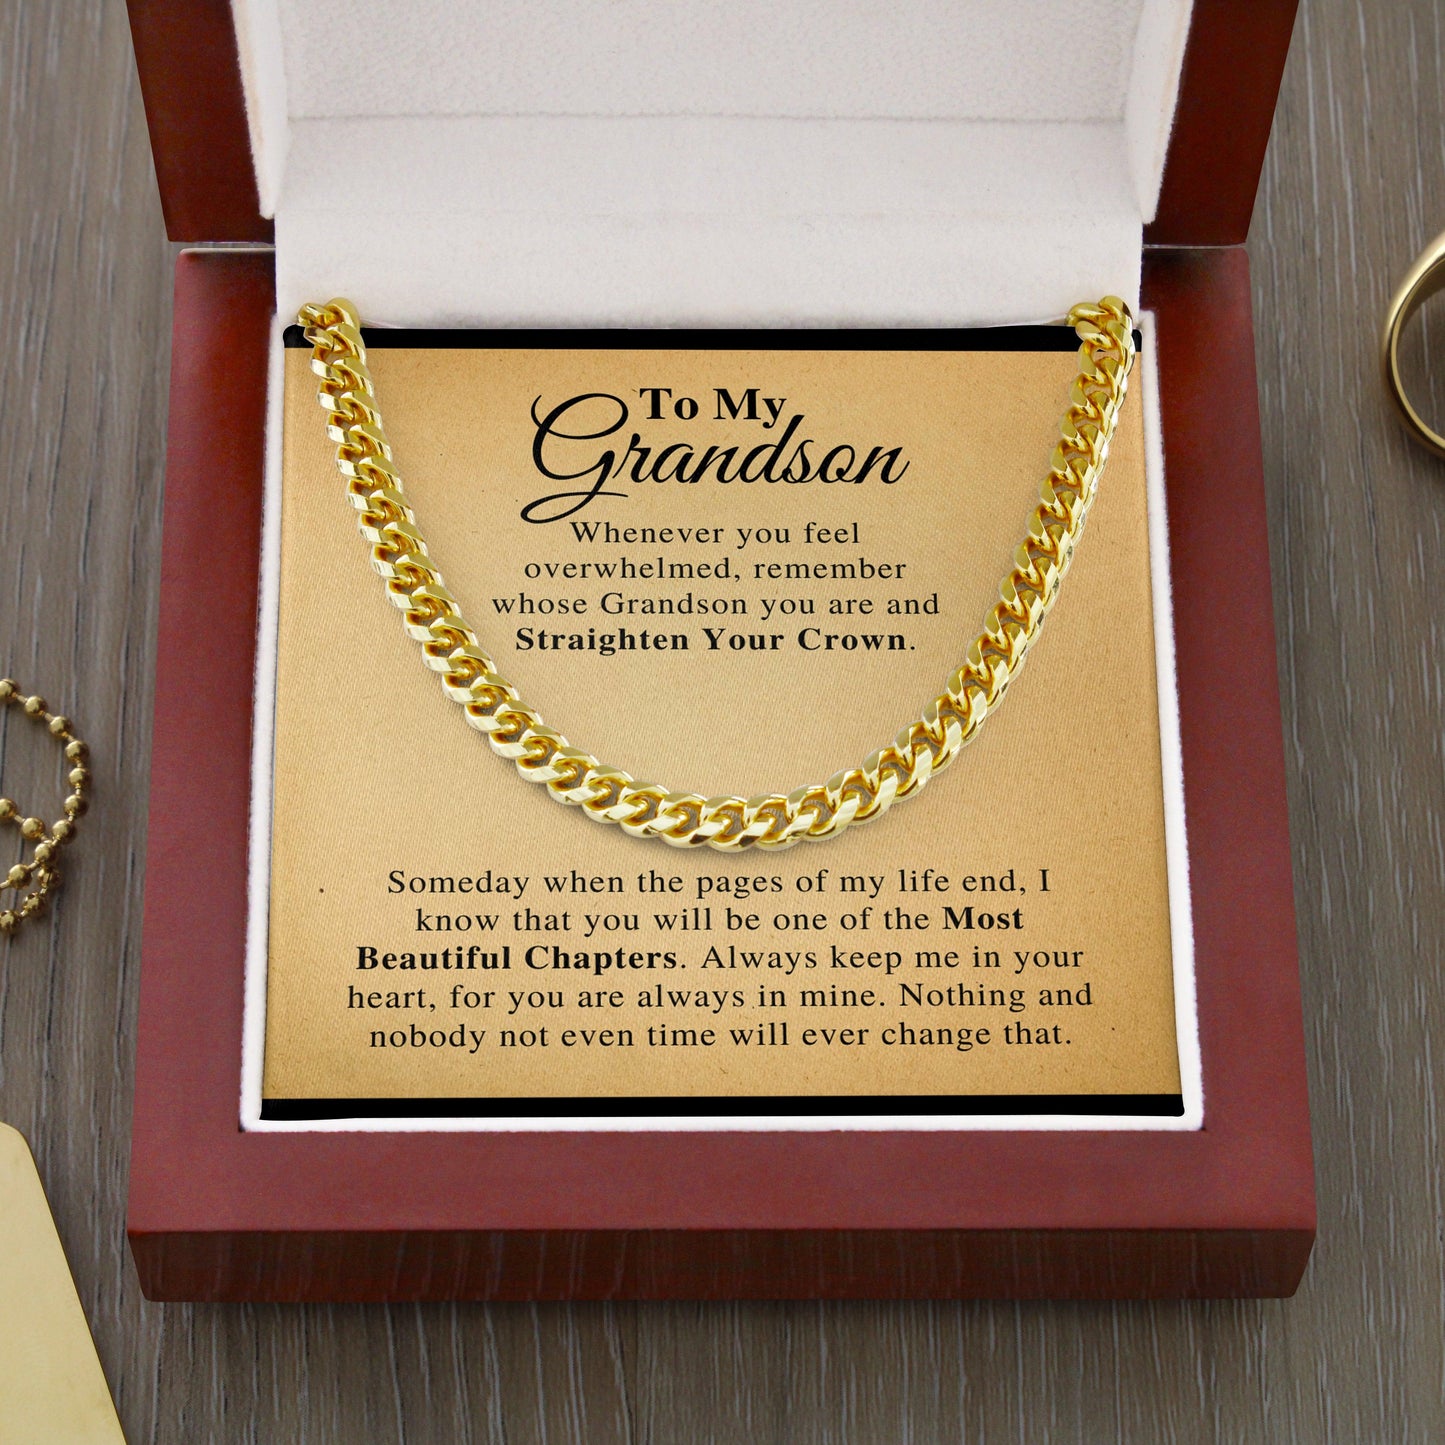 Jewelry gifts Grandson - The Best - Cuban Link Chain - Belesmé - Memorable Jewelry Gifts 